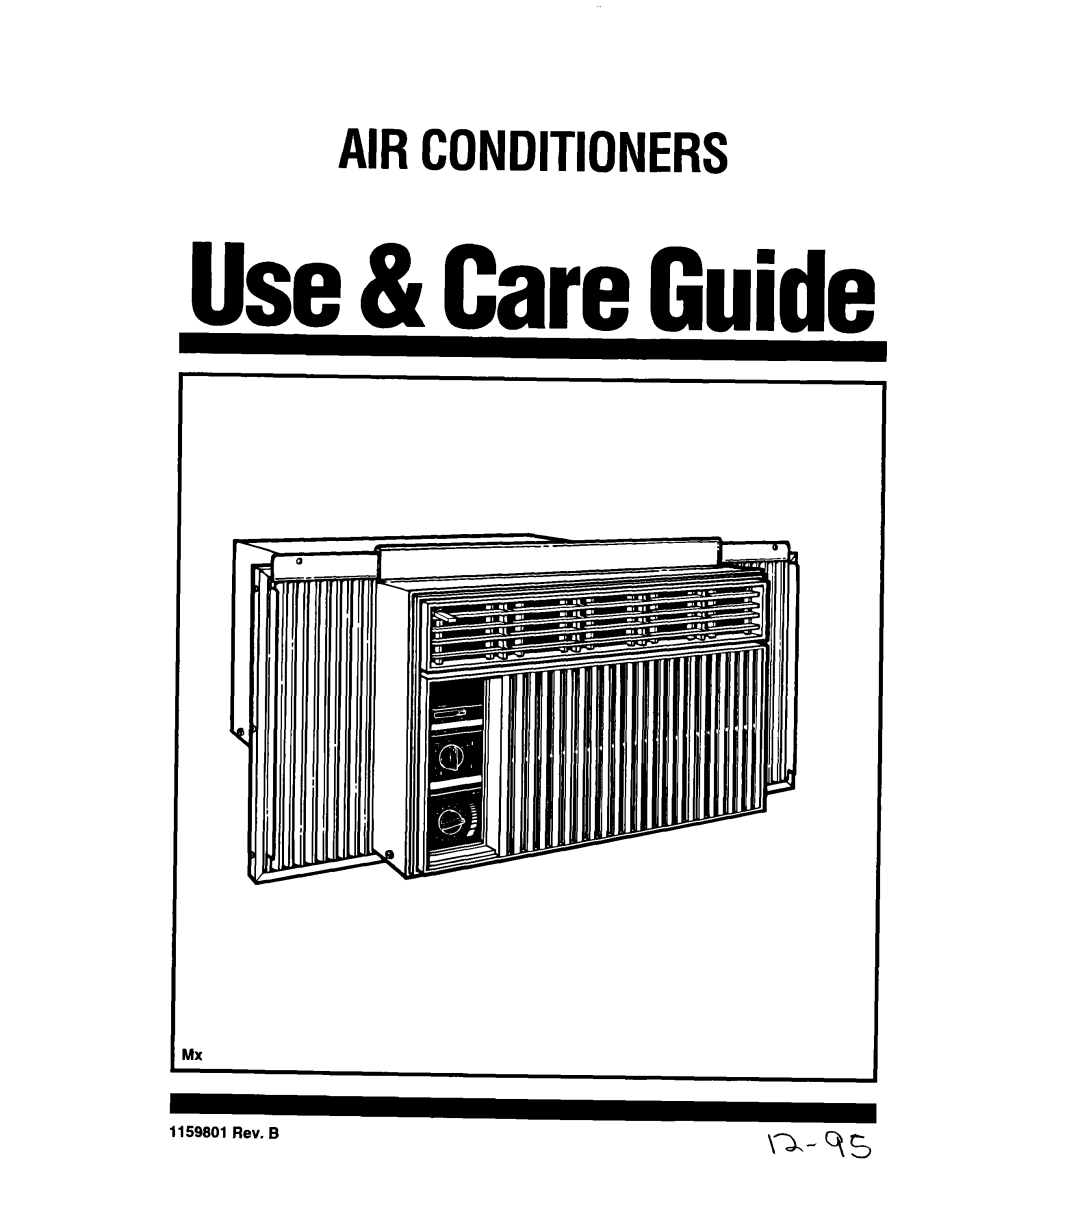 Whirlpool 1159801 manual Airconditioners, Use& CareGuide, 345 